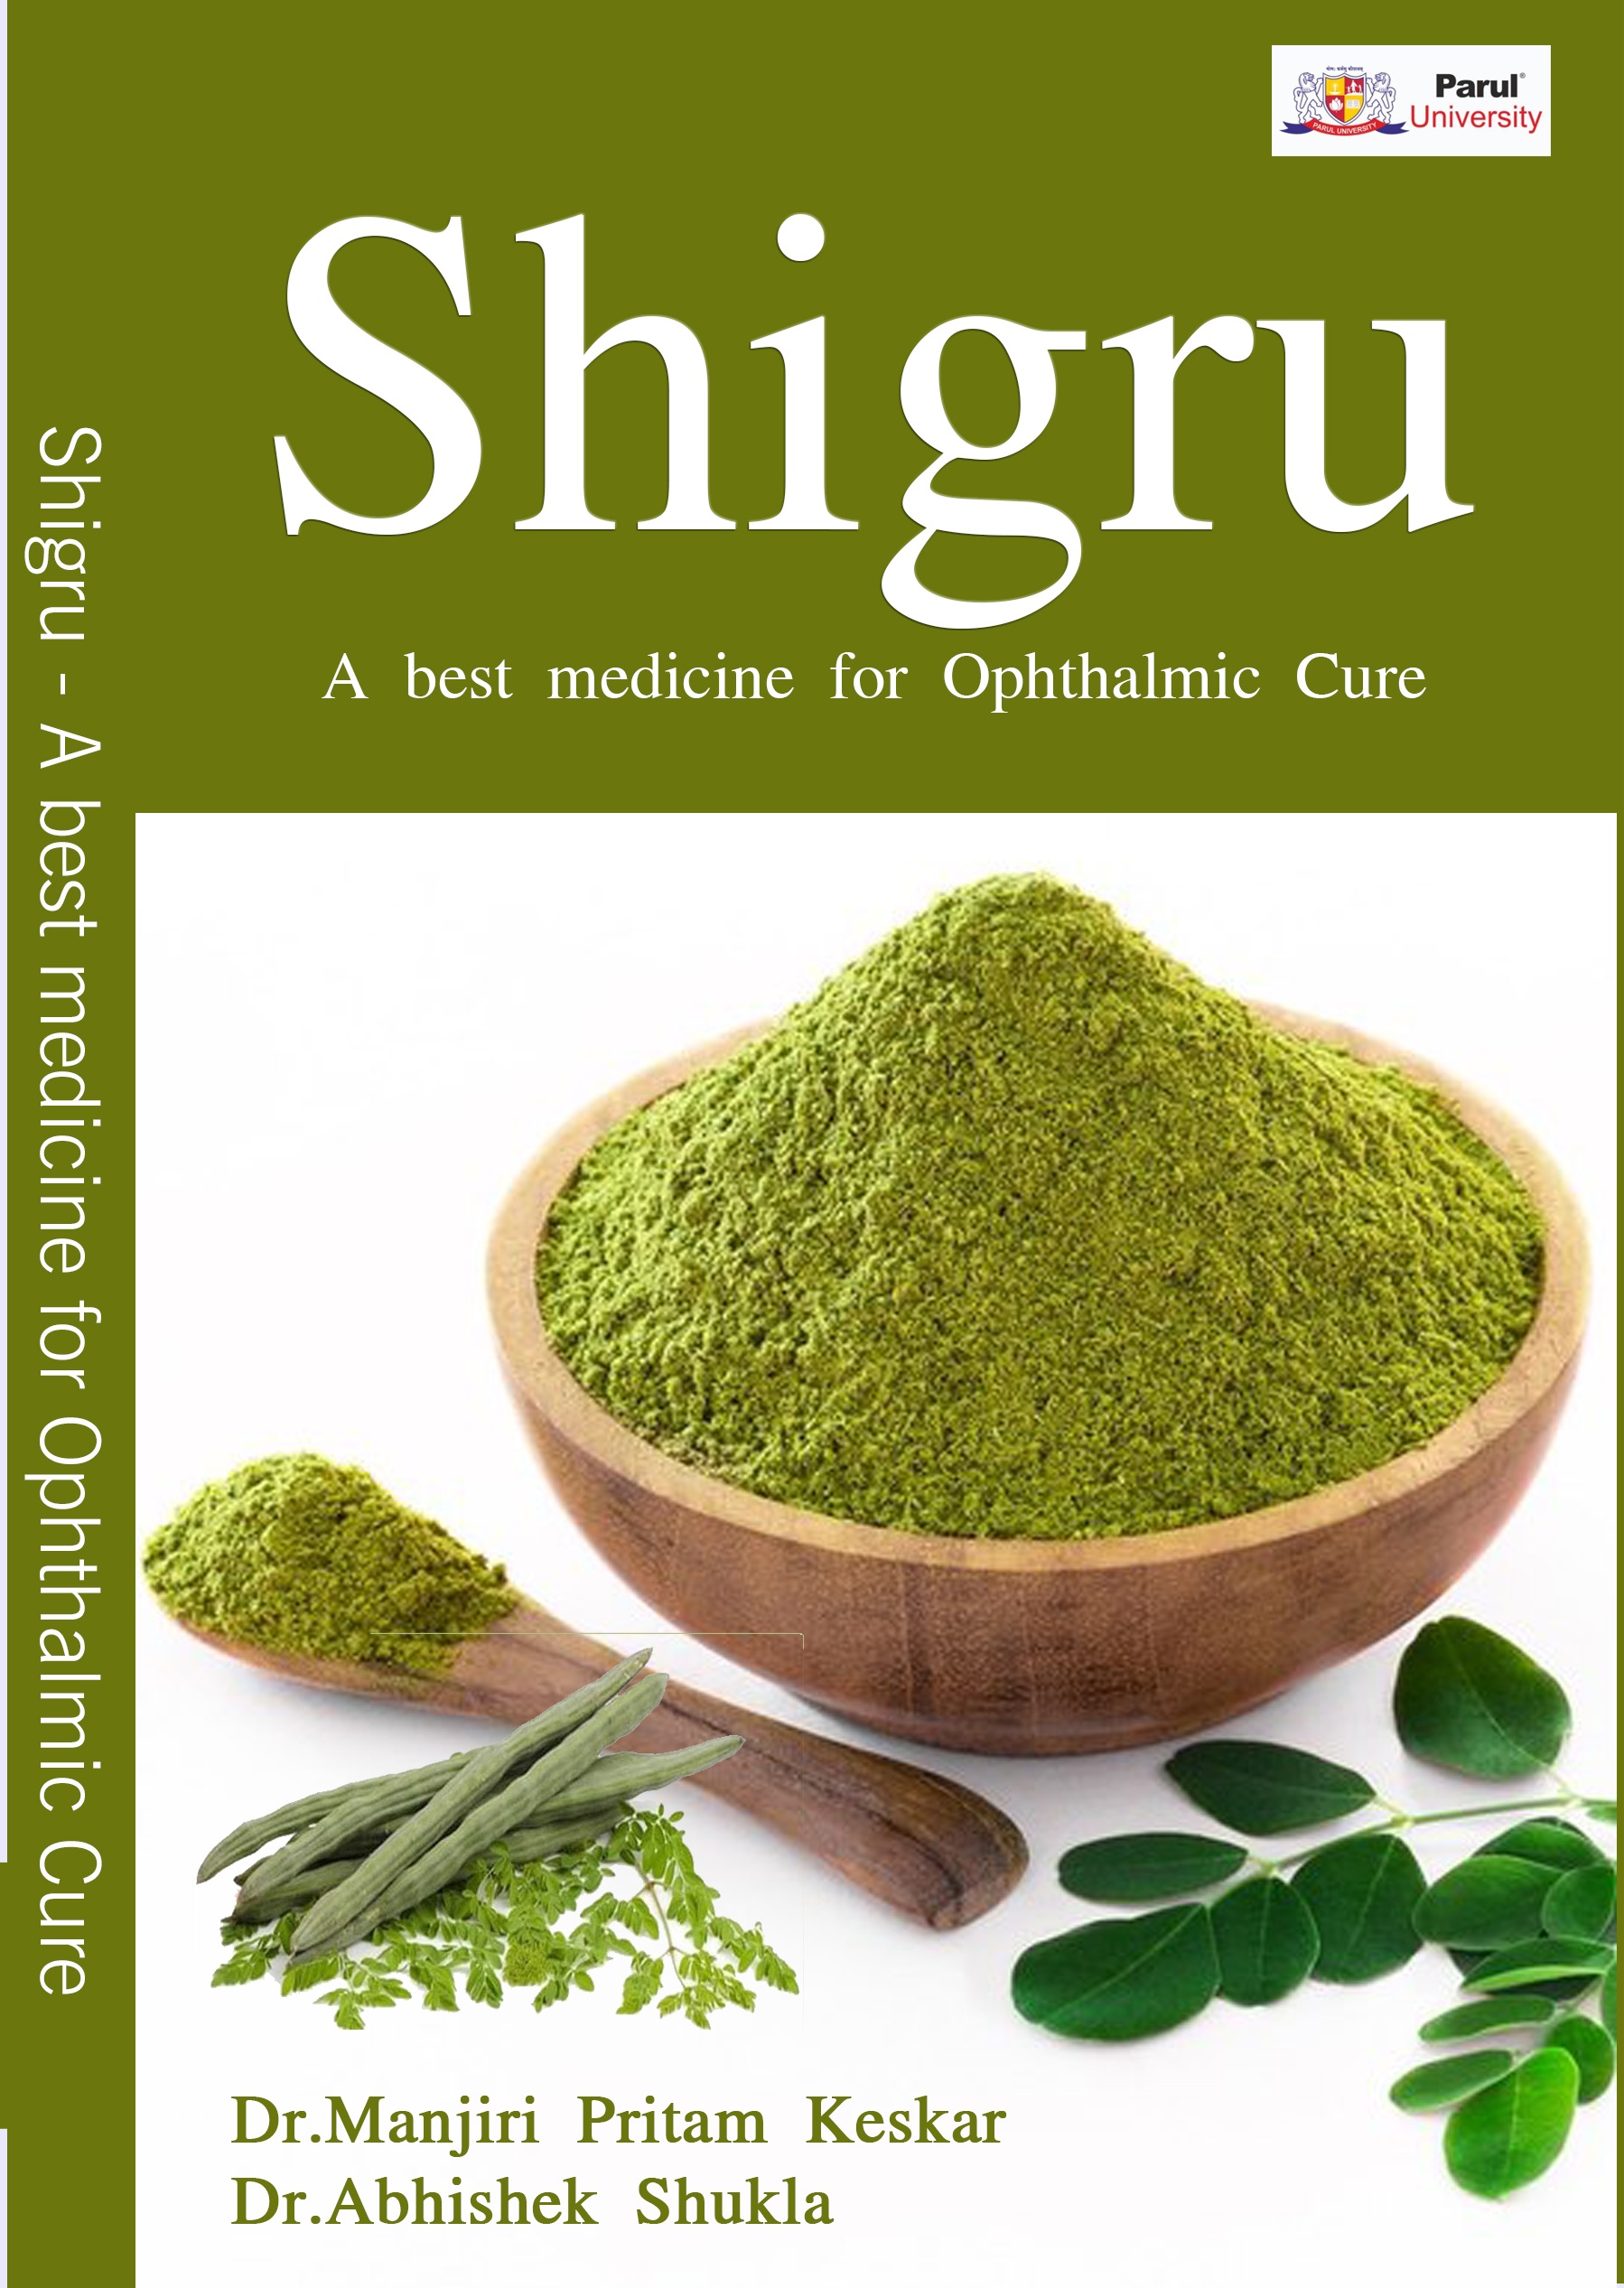 SHIGRU BEST MEDICINE FOR OPHTHALMIC CARE AND CURE